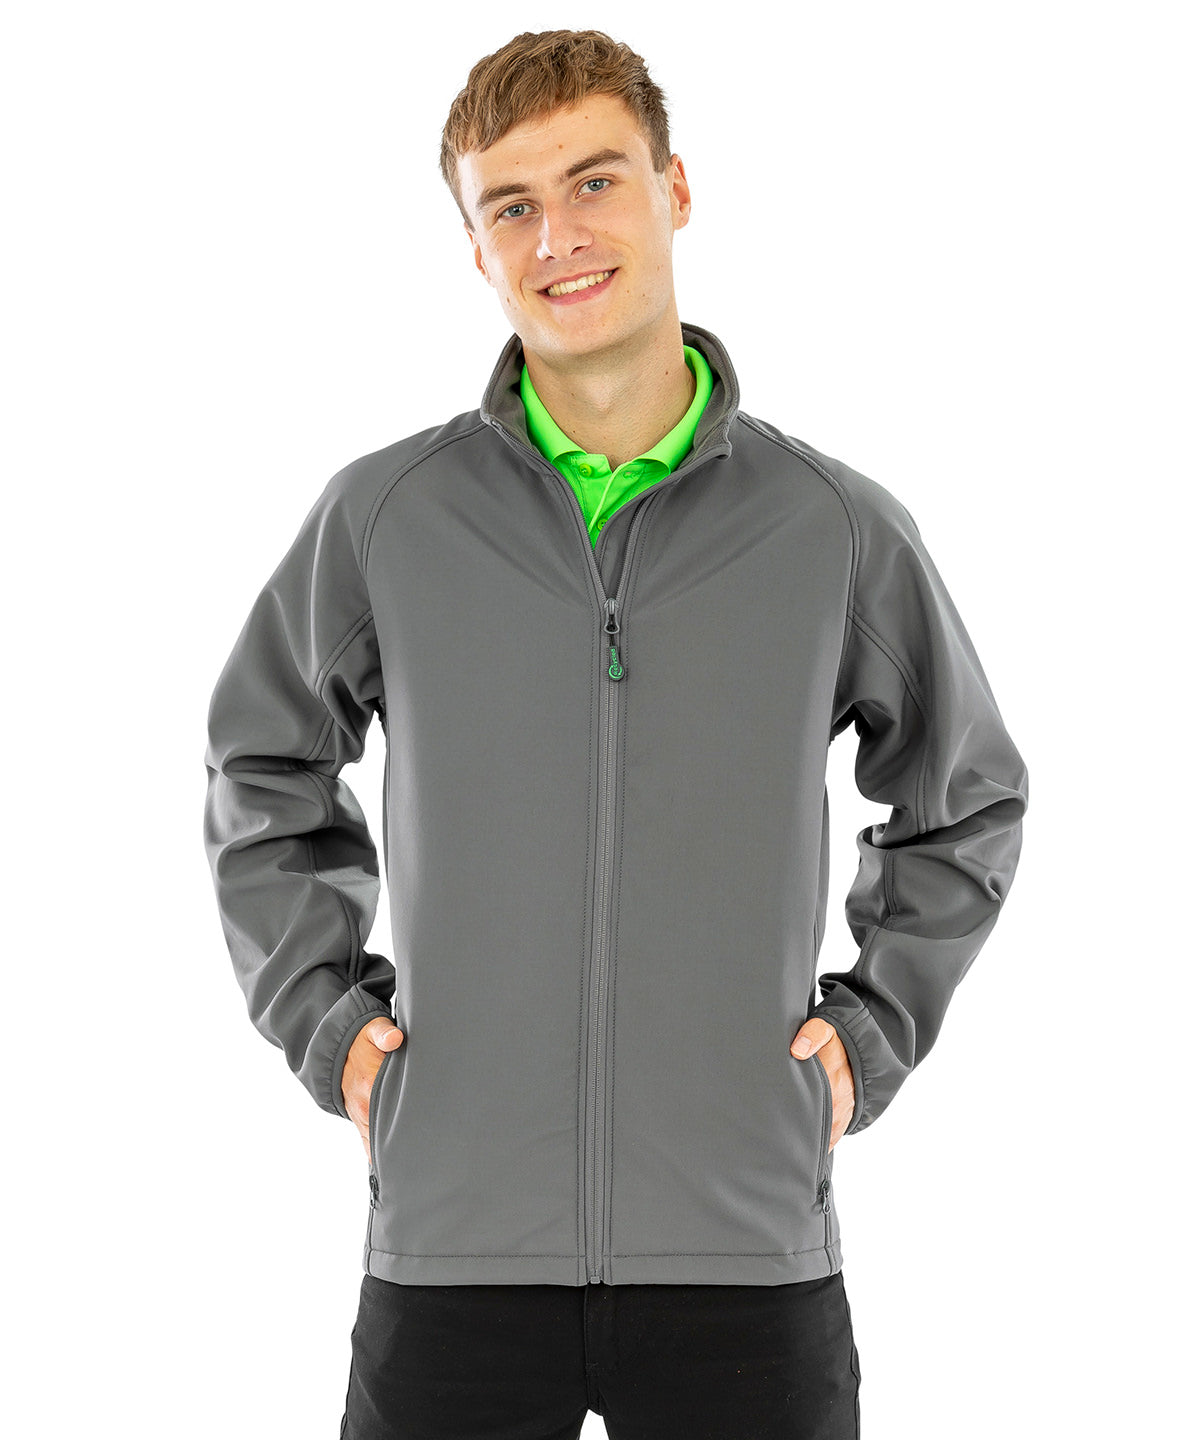 Men's Recycled 2-layer Printable Softshell Jacket